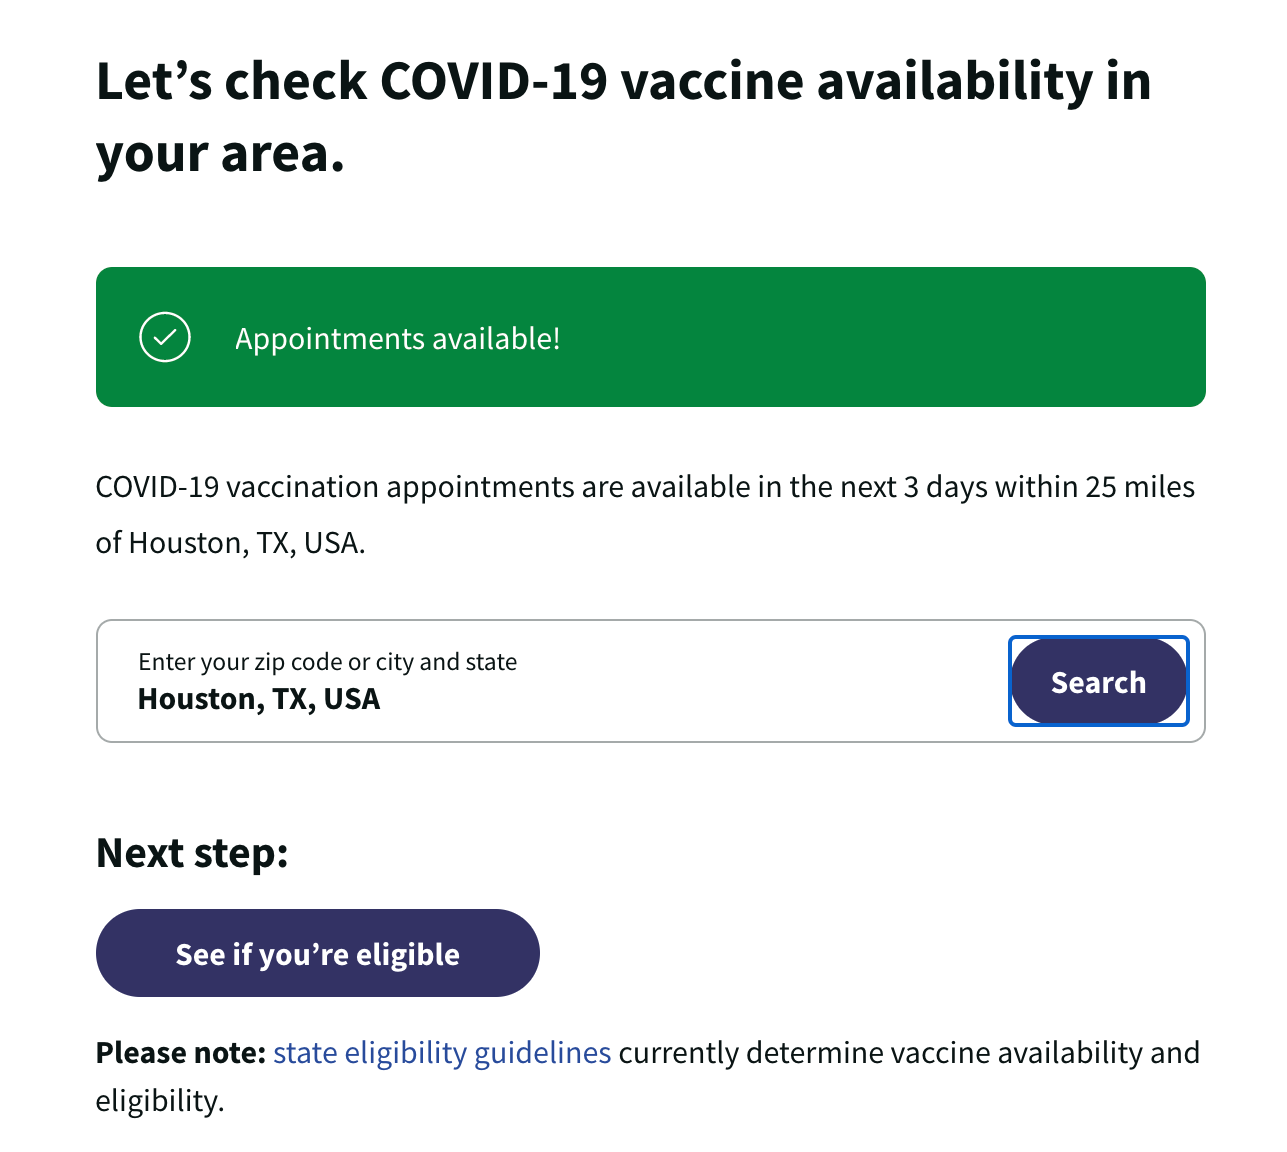 cvs travel vaccine appointment